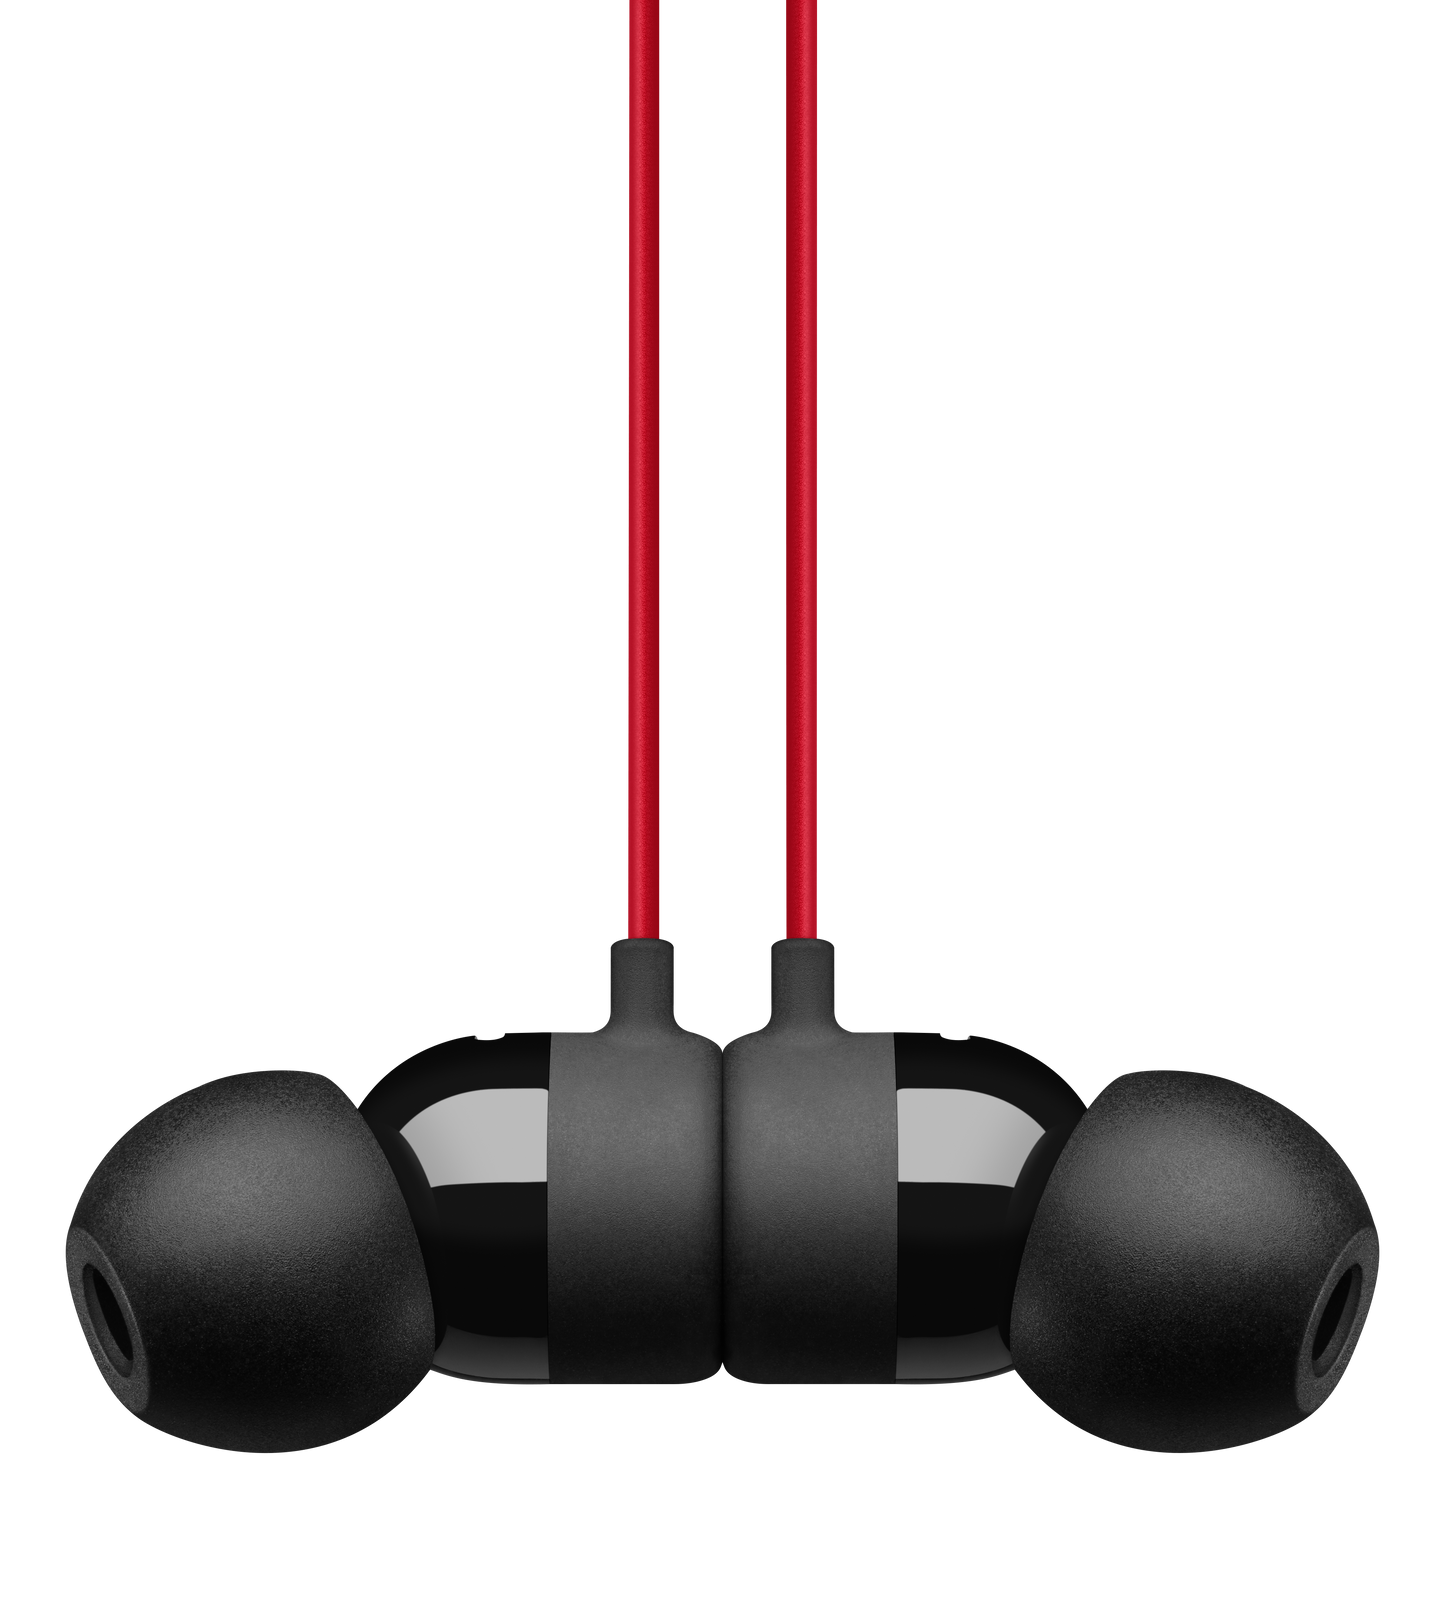 urBeats3 Earphones with Lightning Connector - The Beats Decade Collection - Defiant Black-Red